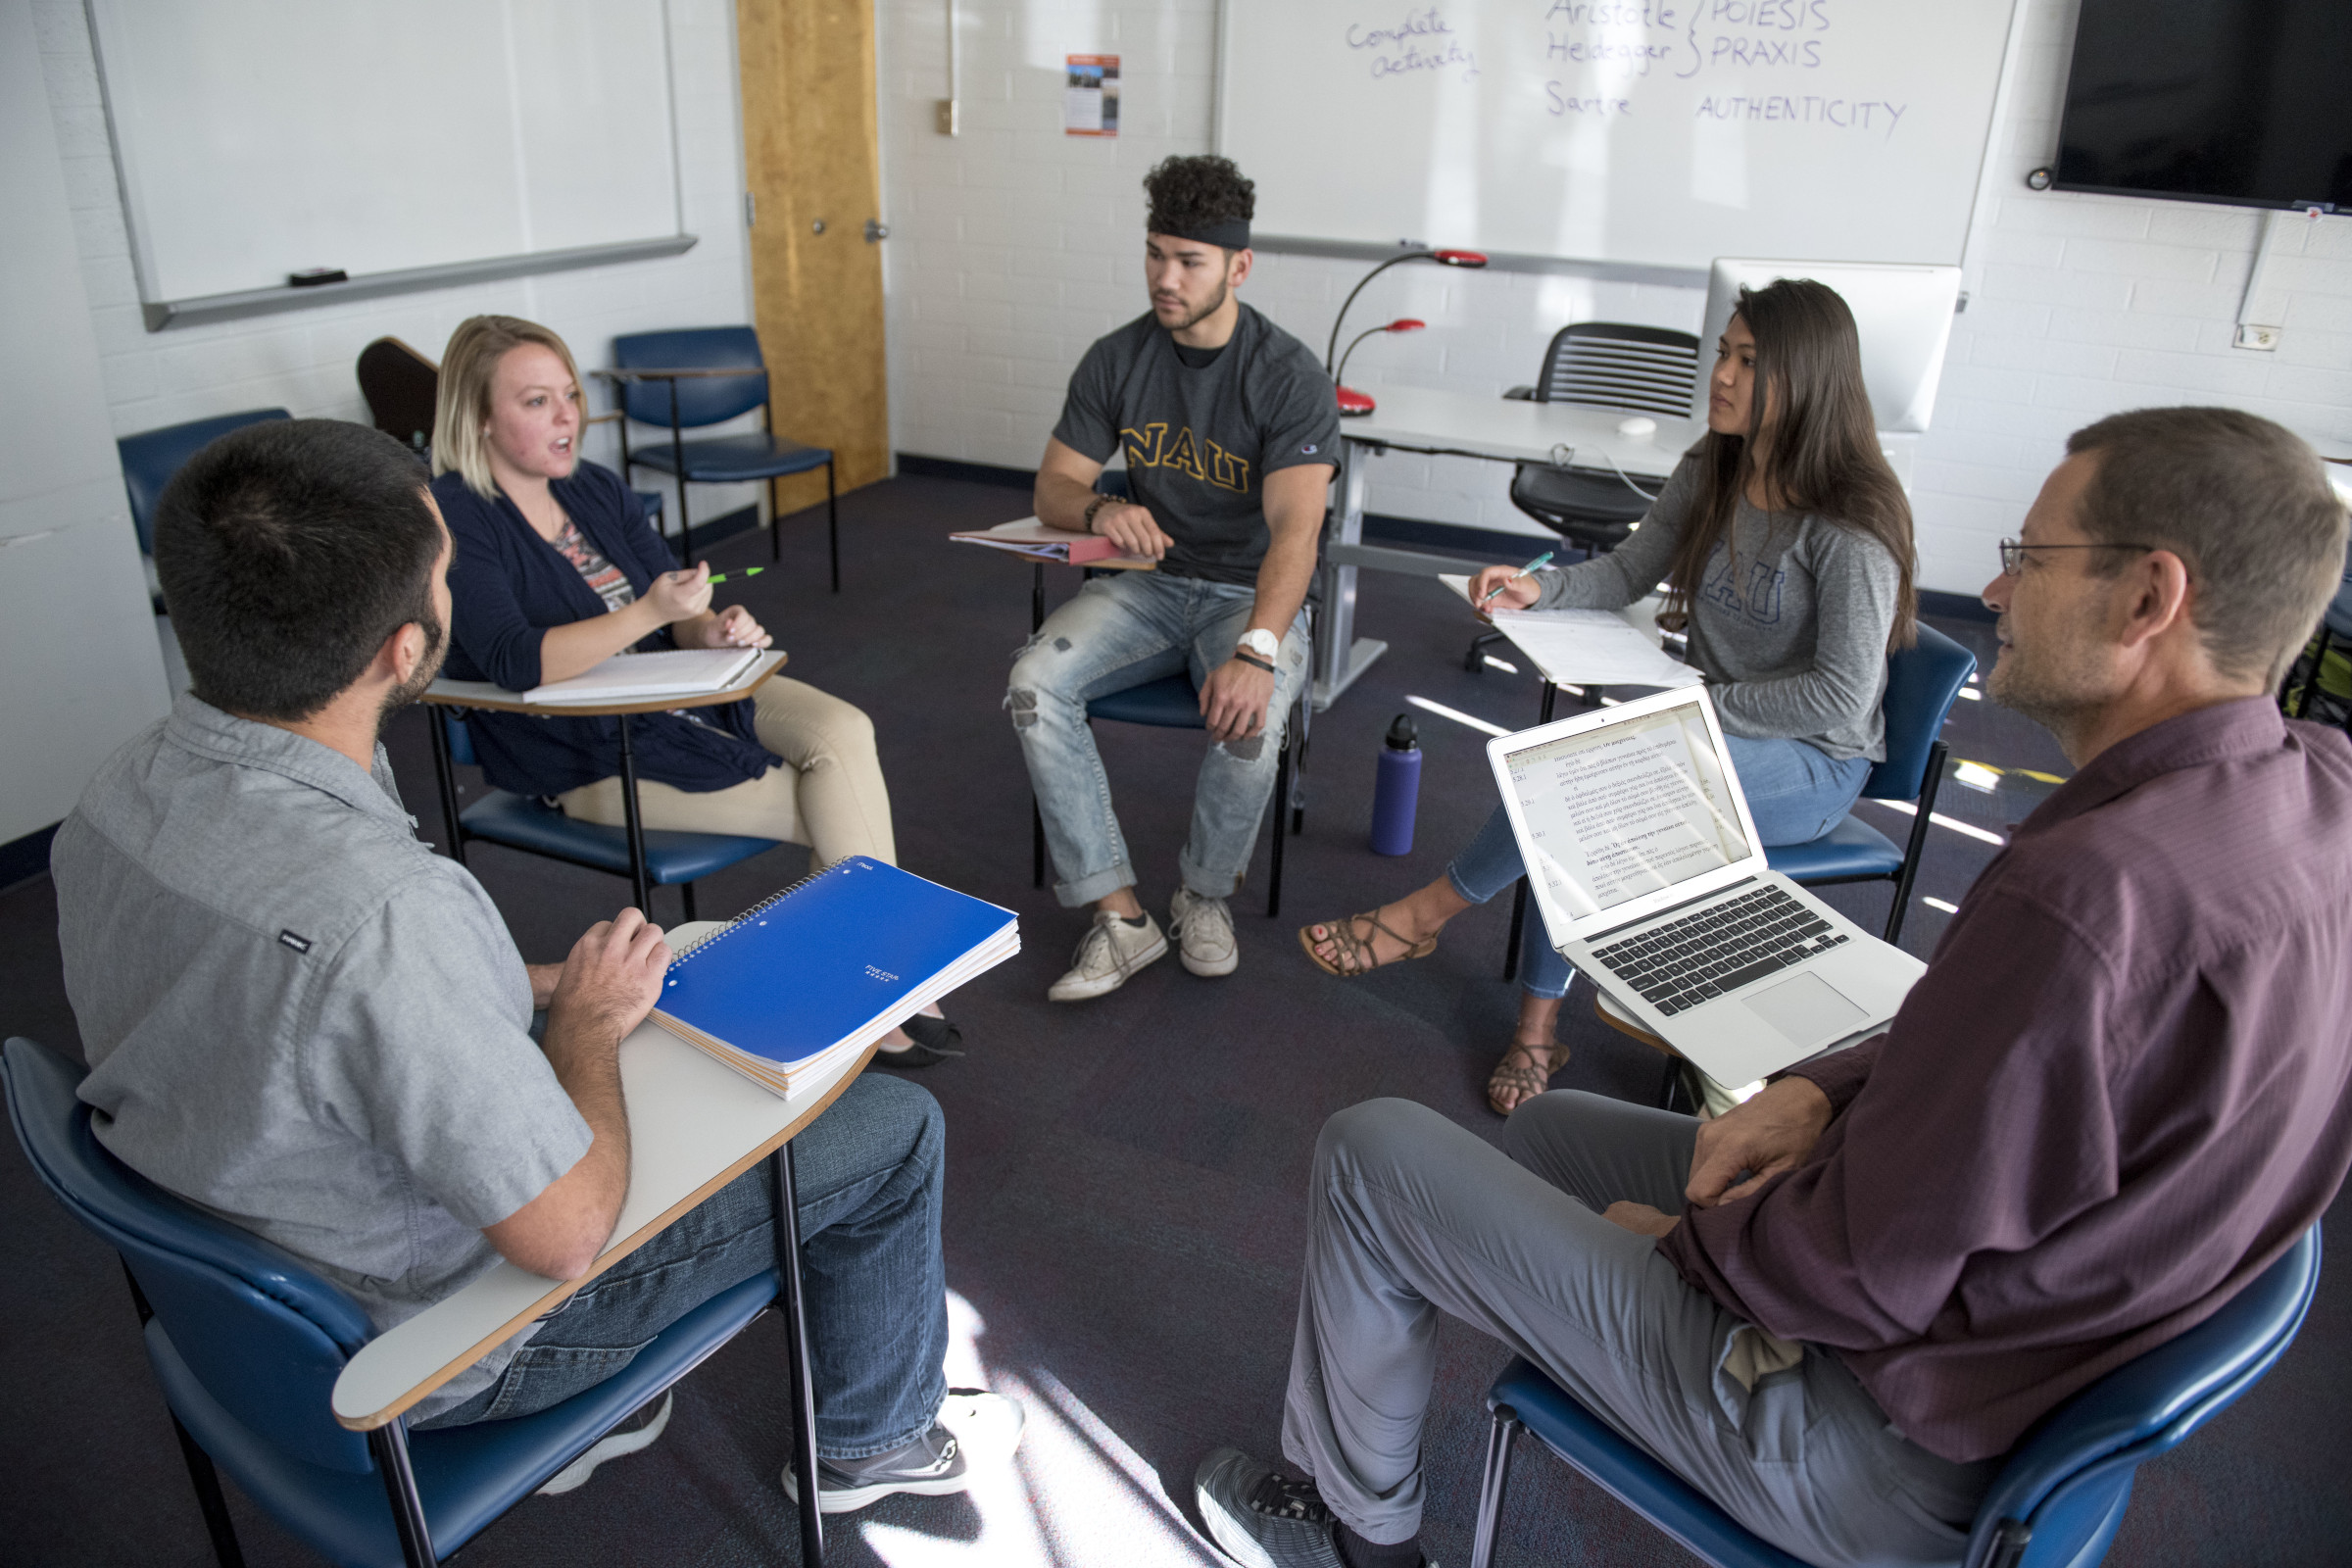 Rudebusch sits in a circle with his students during a discussion.